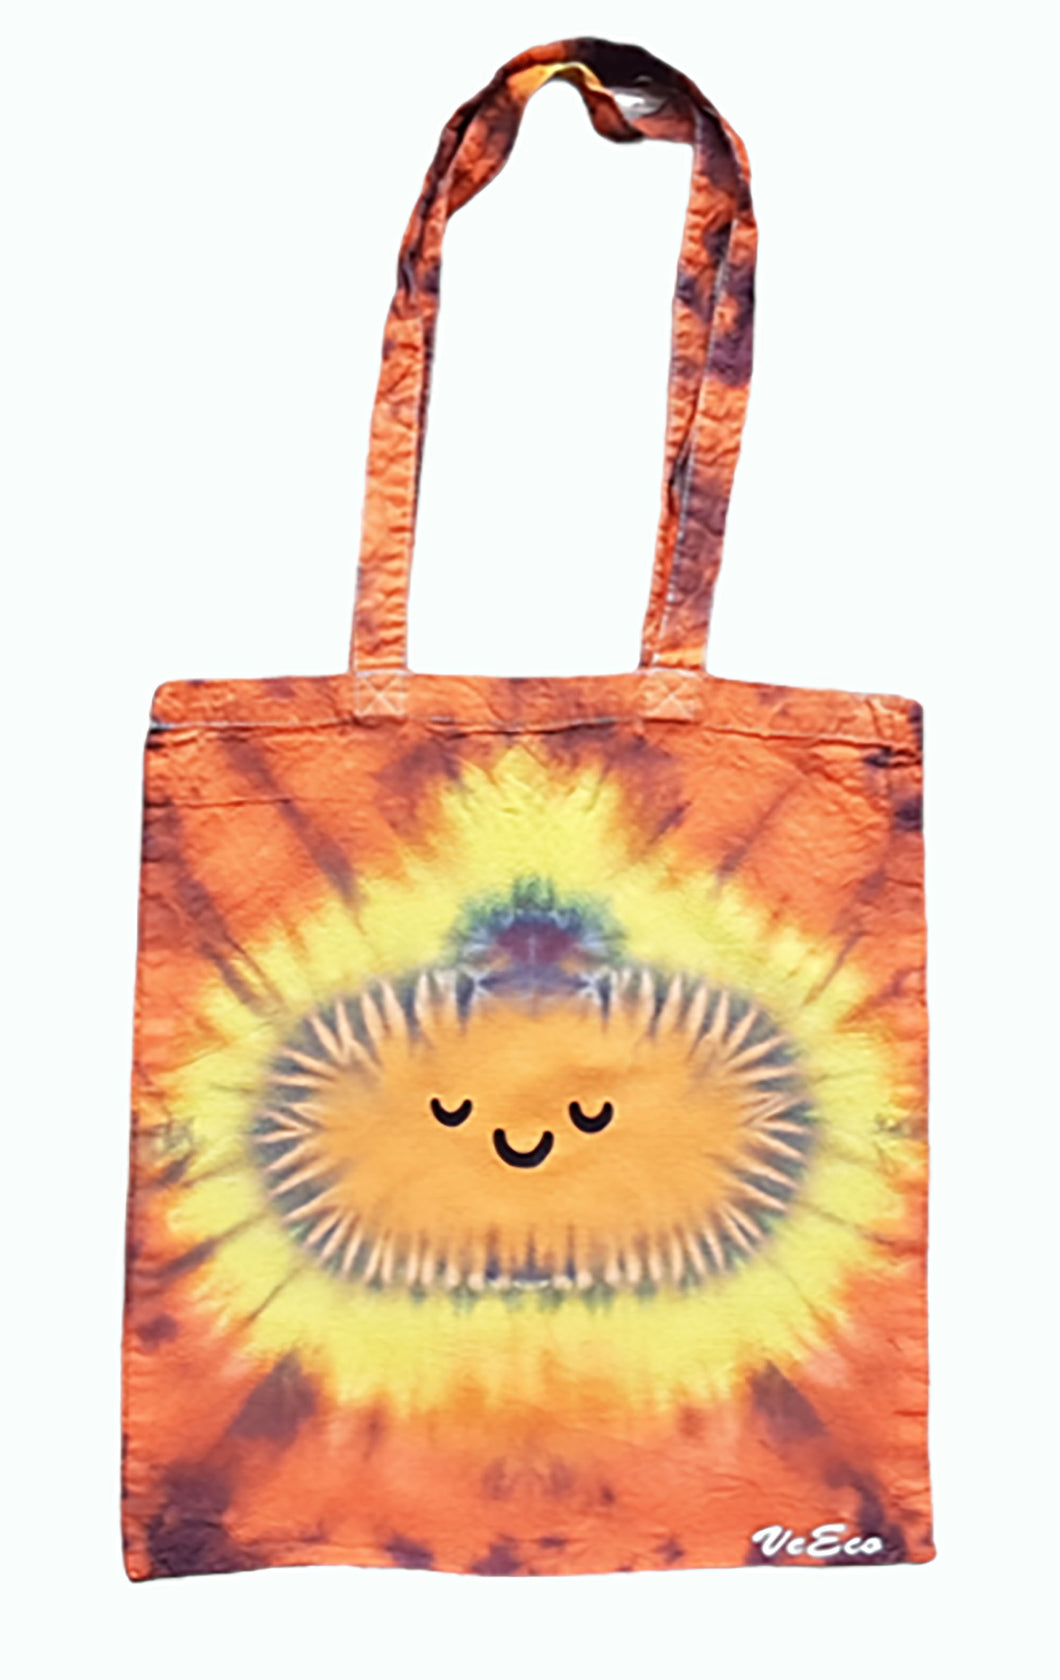 Various Halloween designs tie dye tote bag. Top row includes the designs Evil Eyes, Cute Pumpkin and Skull Face. The bottom row includes Trick or Treat text, Ghost, Cow being abducted by a UFO and a Smiling Pumpkin